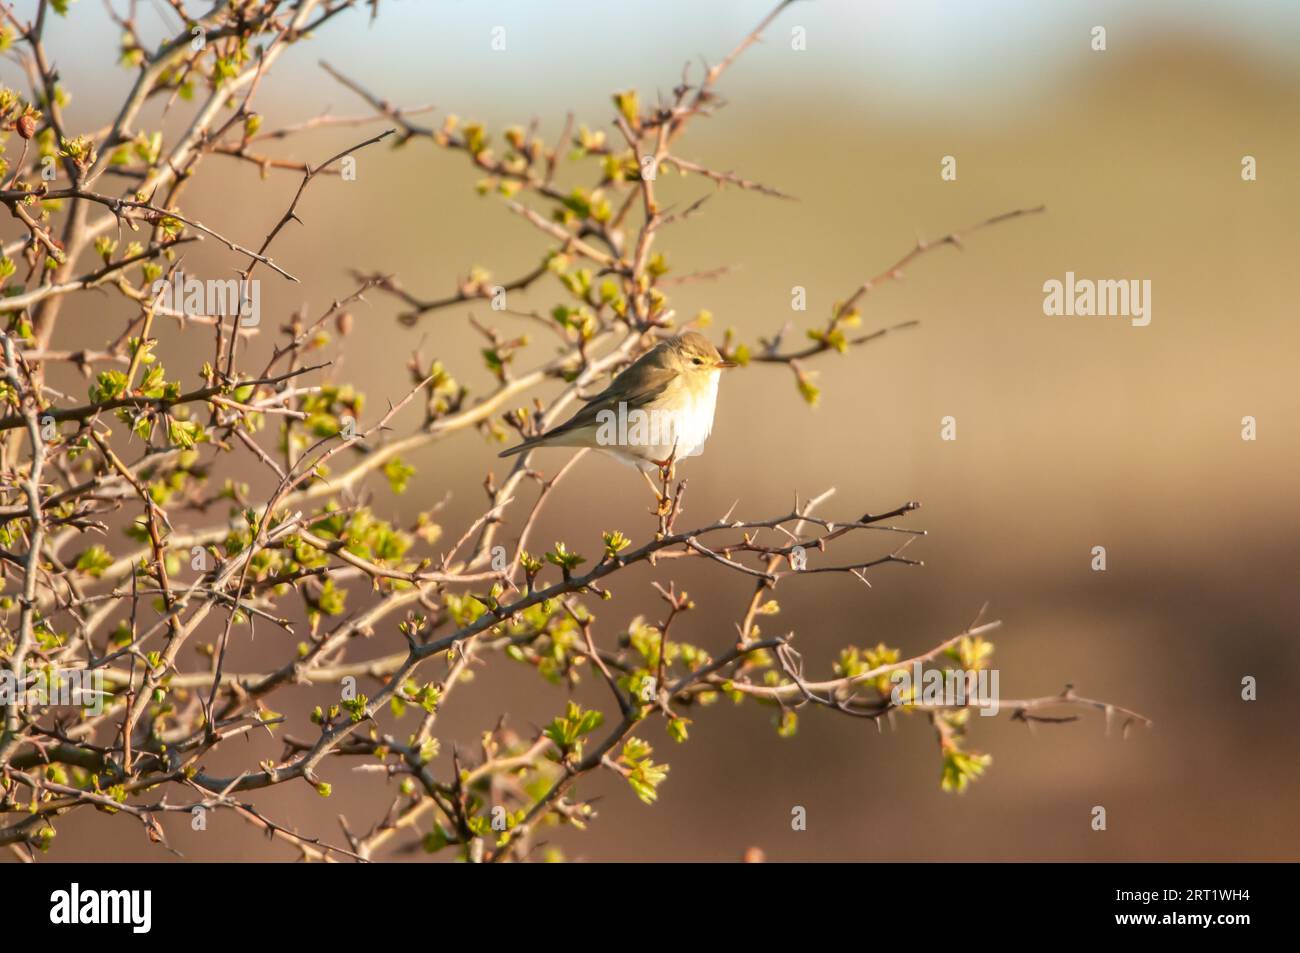 Songbird willow warbler in a shrub on a branch Stock Photo